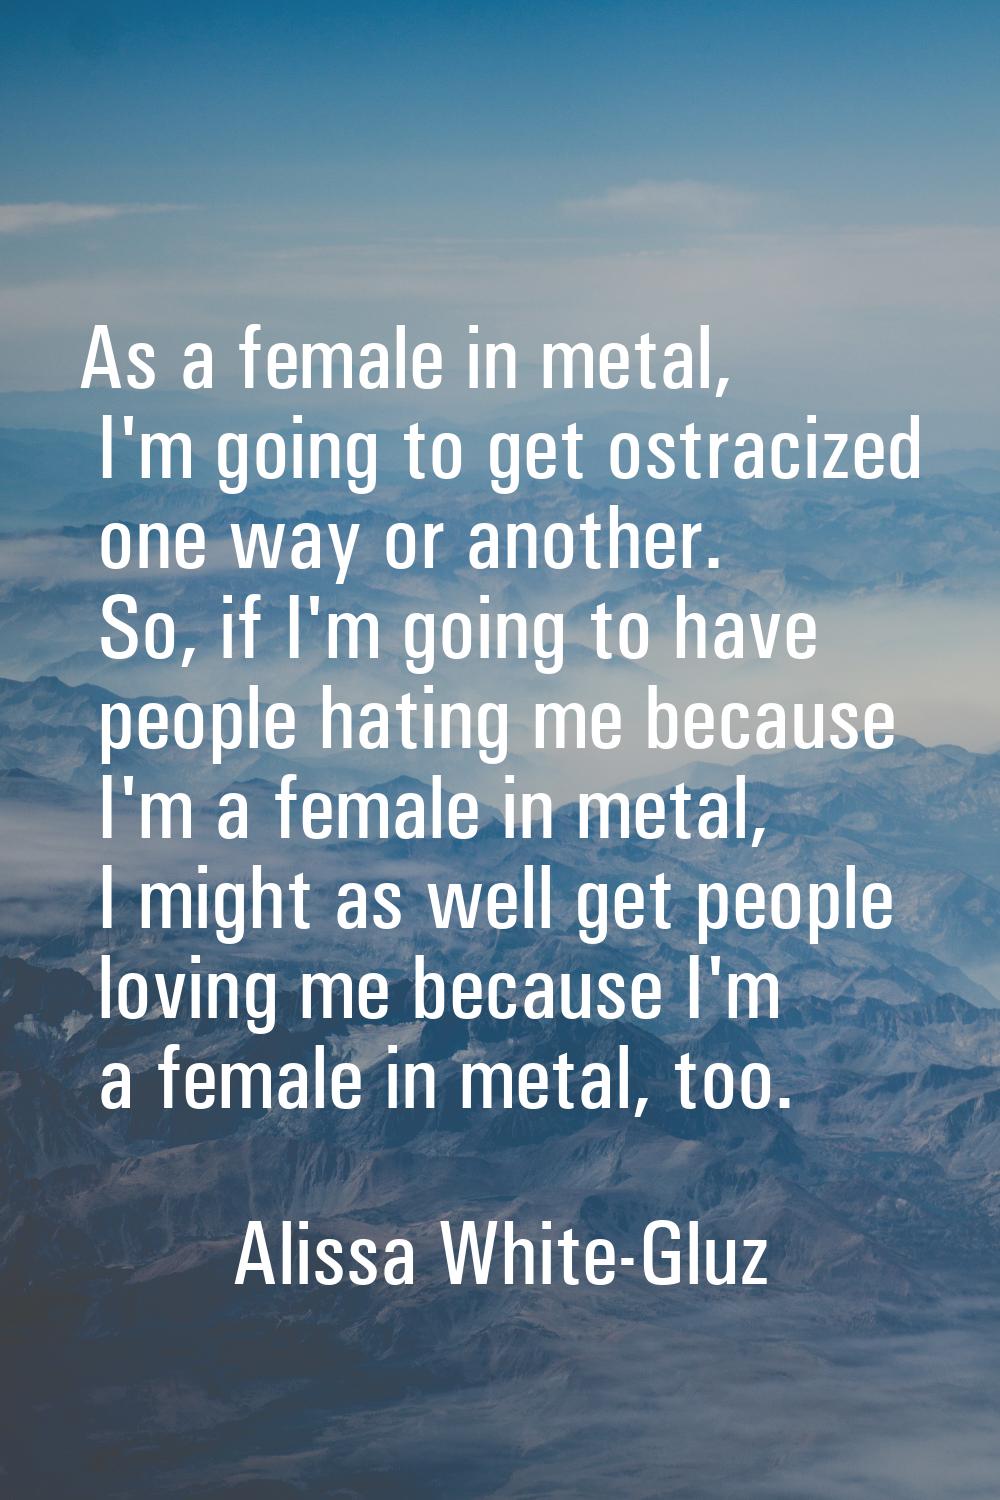 As a female in metal, I'm going to get ostracized one way or another. So, if I'm going to have peop